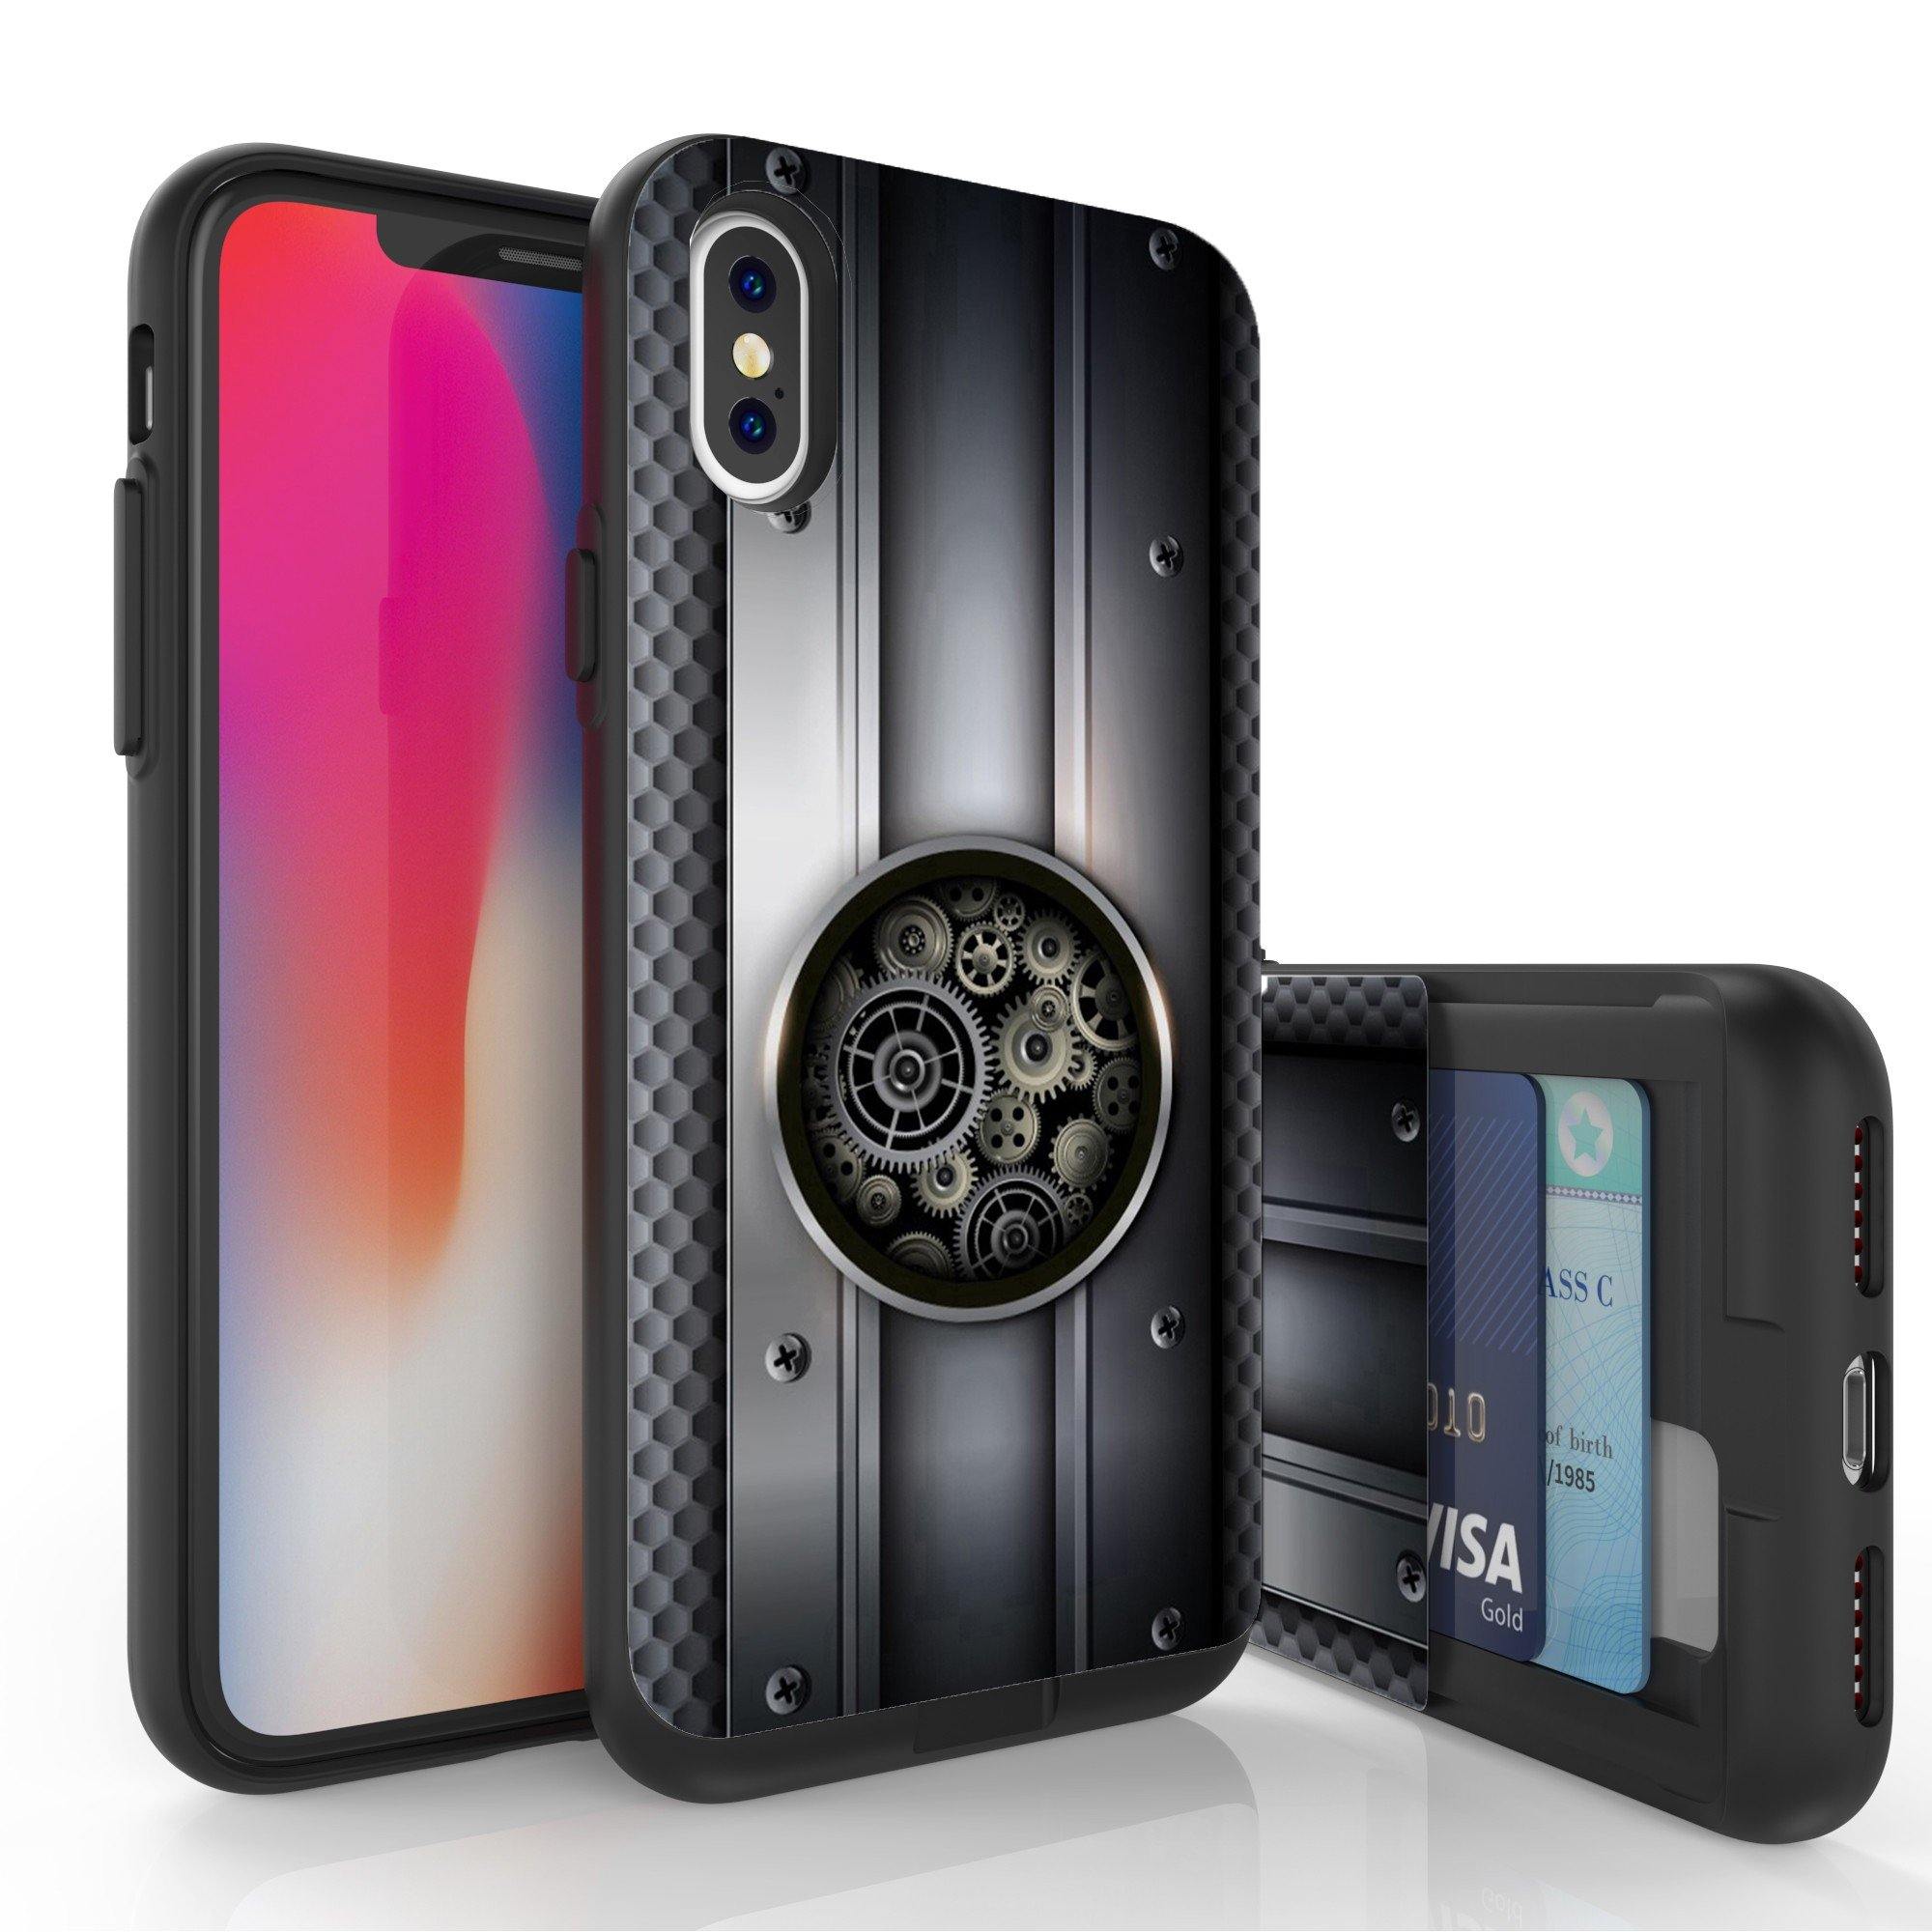 Duo Shield Slim Designed For Apple iPhone XS 2018/iPhone X Case White PC/ Black TPU - My BC Case